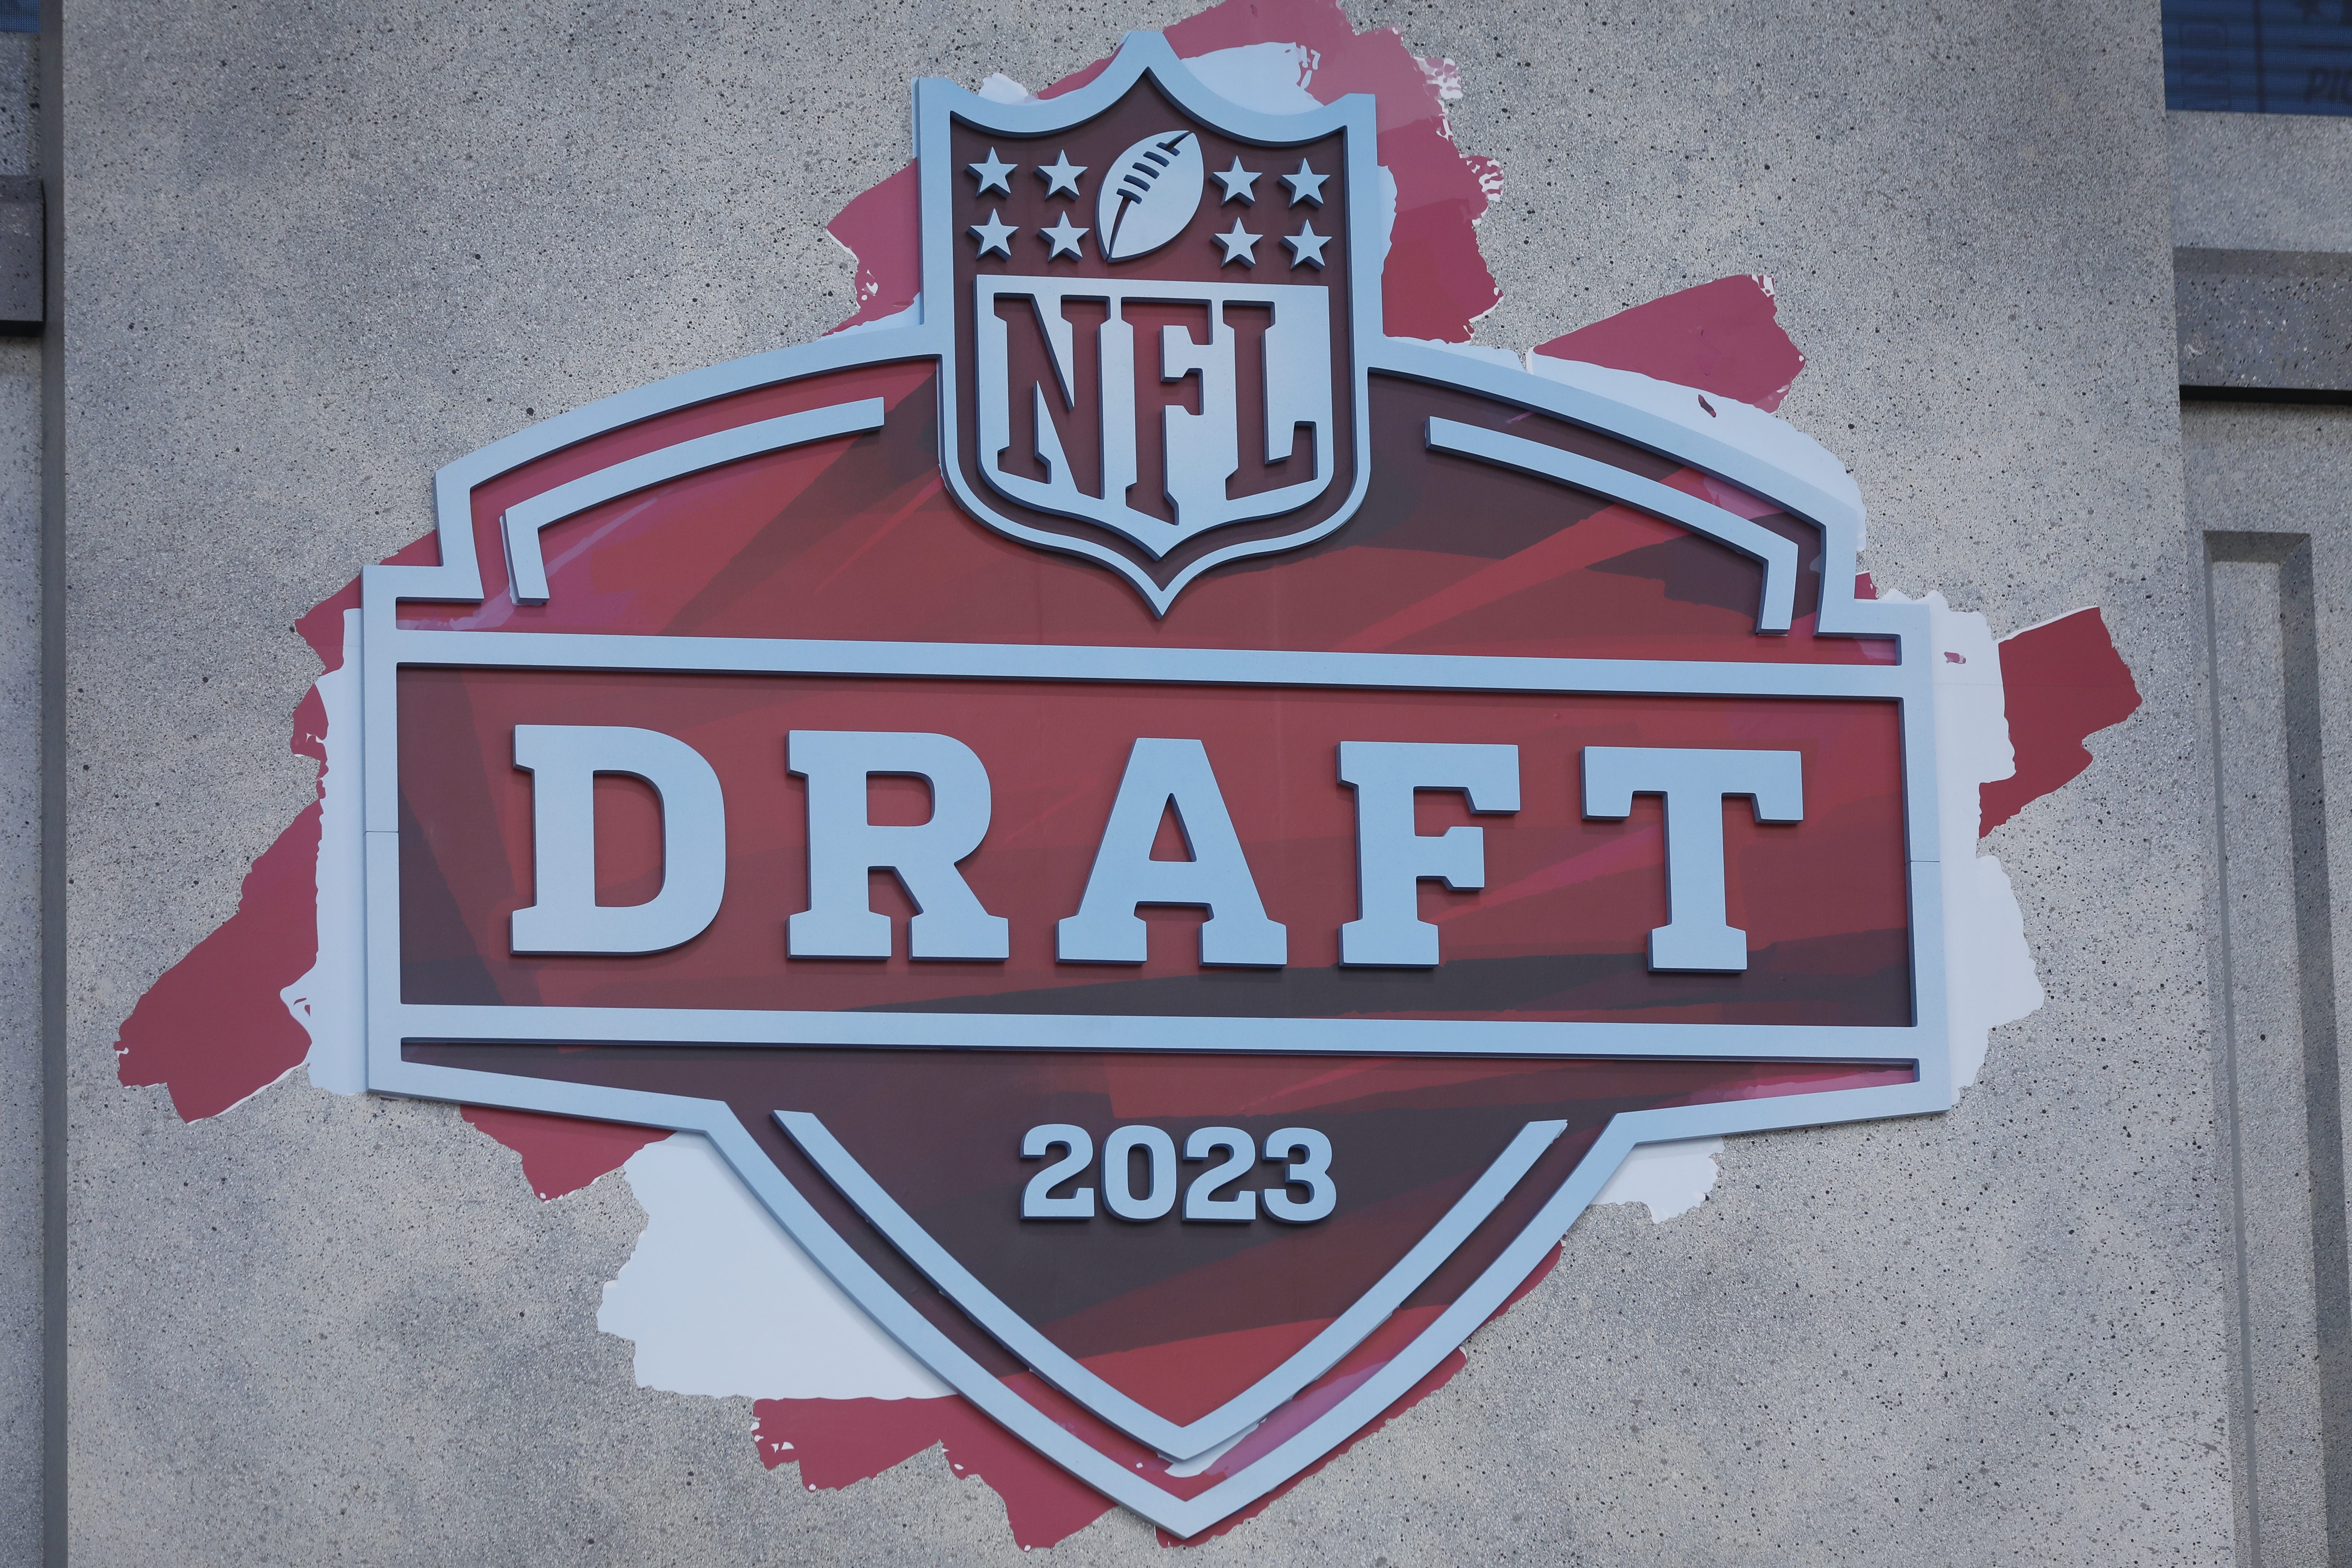 A view of the 2023 NFL Draft logo in Kansas City.